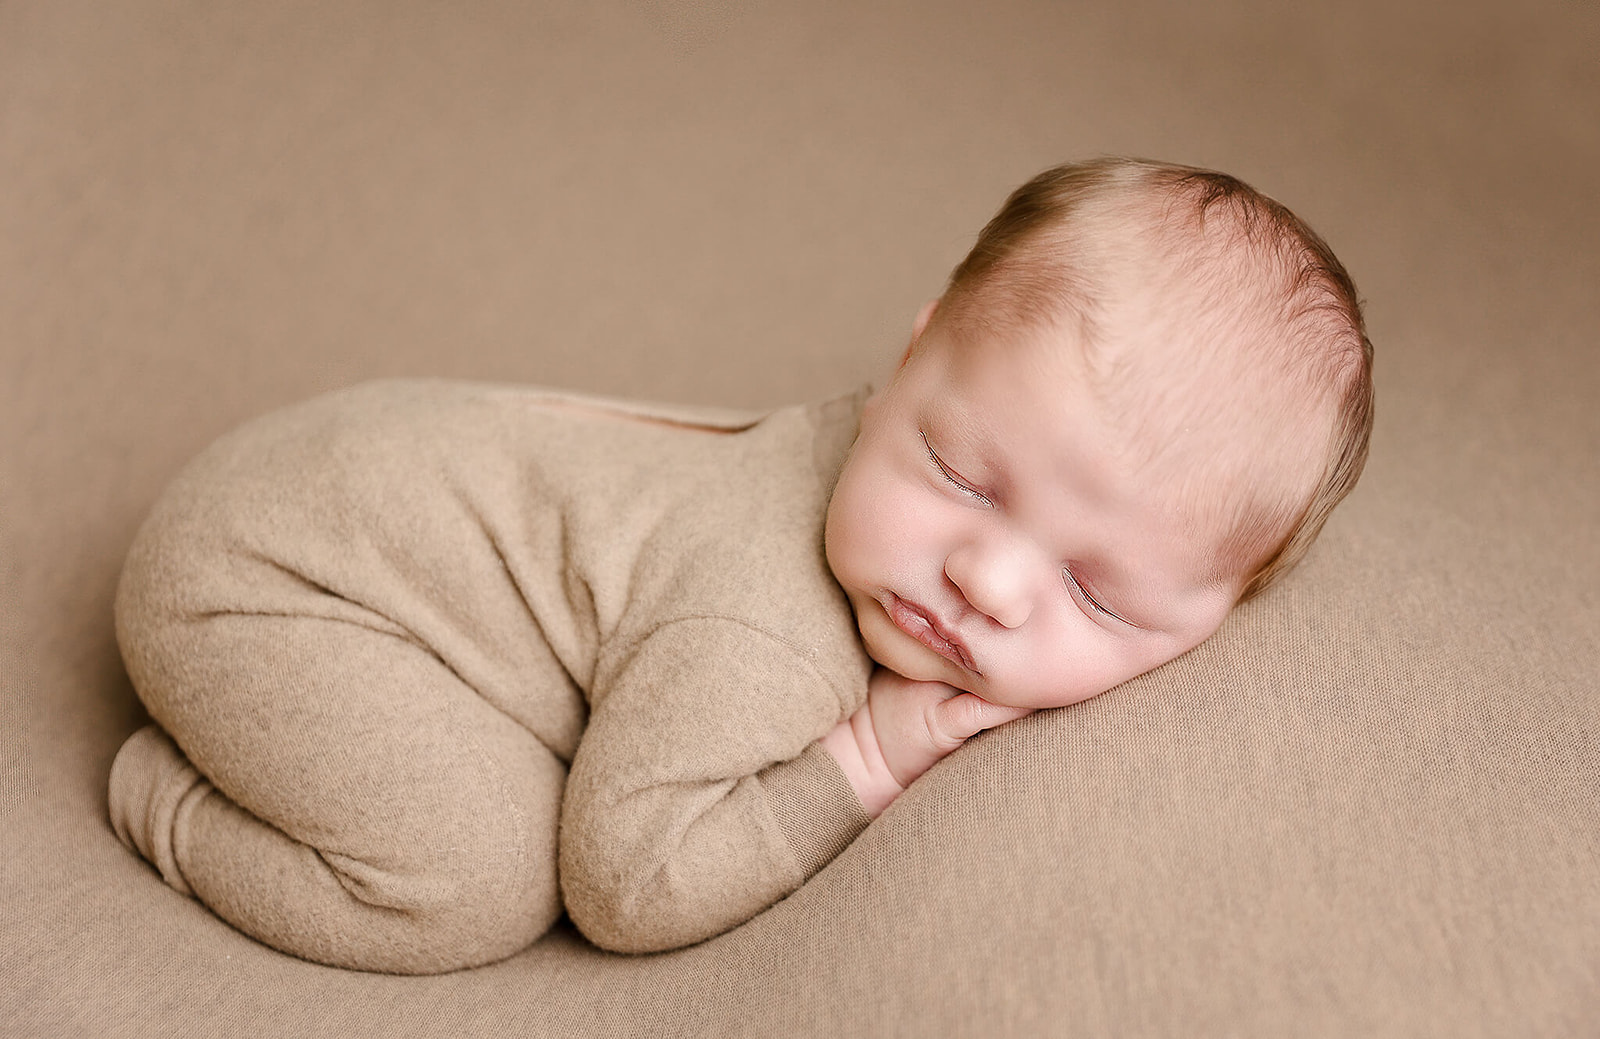 A newborn baby sleeps on a soft brown bed in a froggy pose Irvine Pediatrician